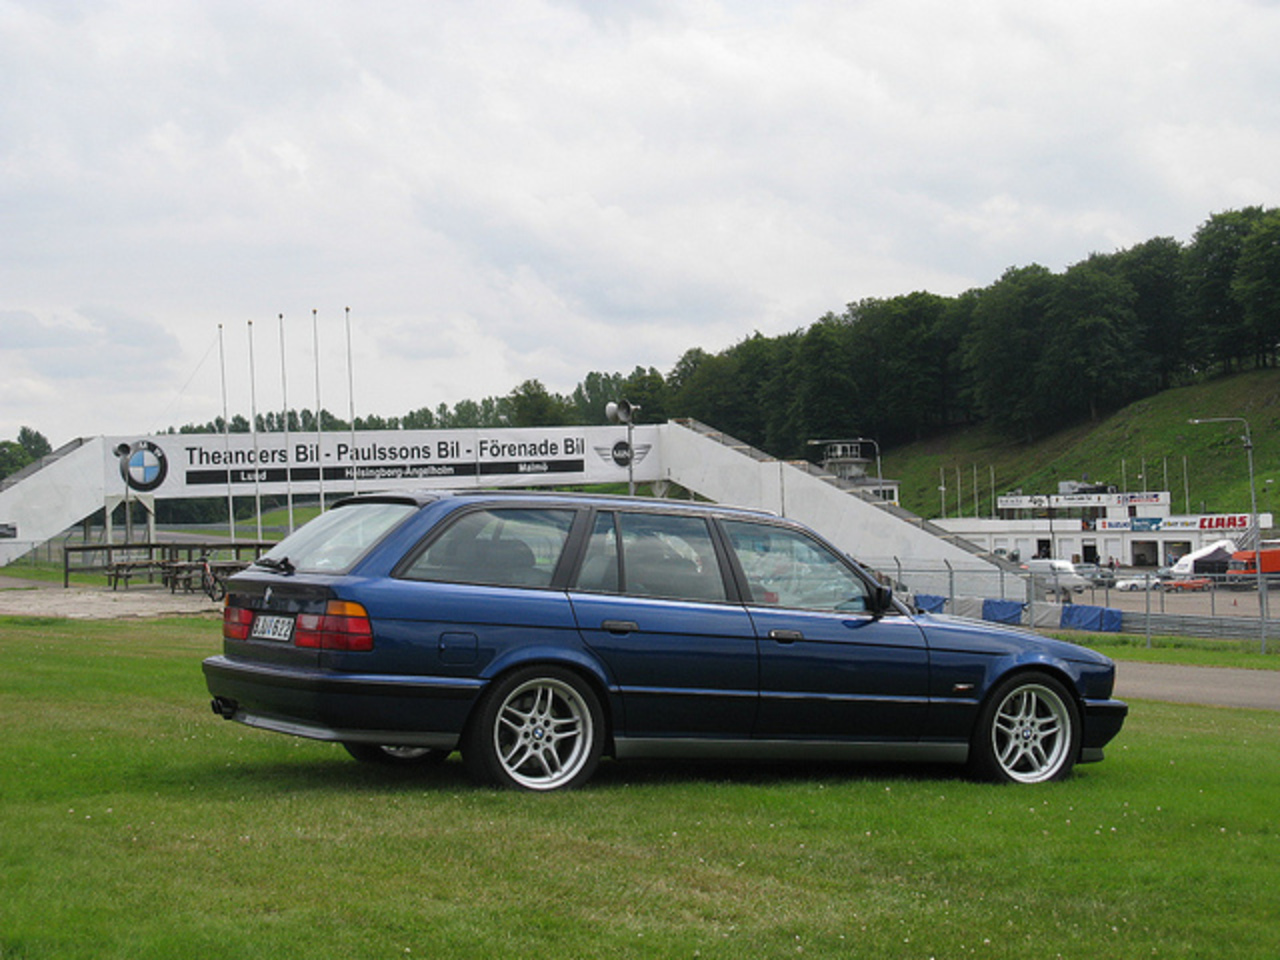 BMW M5 Touring E34 | Flickr - Photo Sharing!